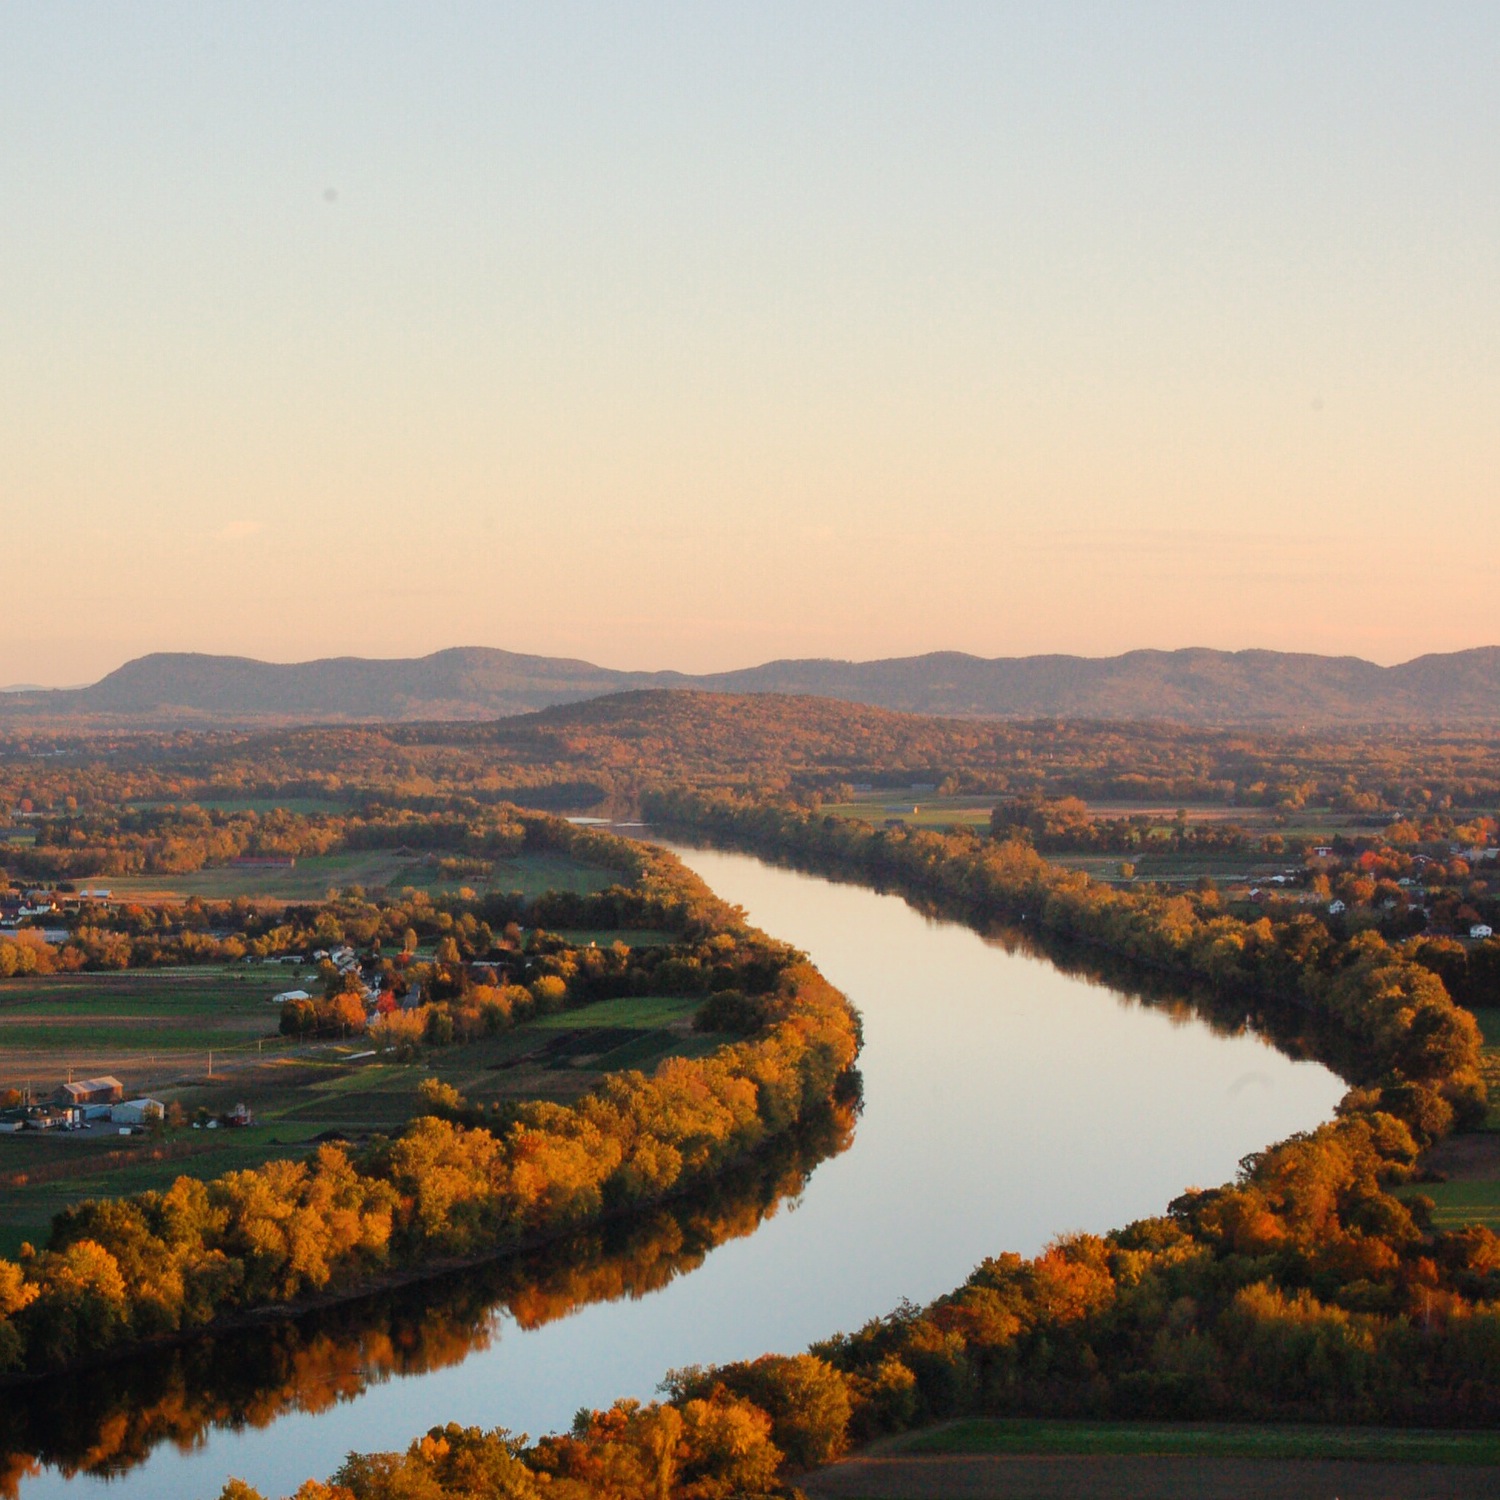 Fall image of the Connecticut River, Sunderland, MA from the peak of Sugarbush